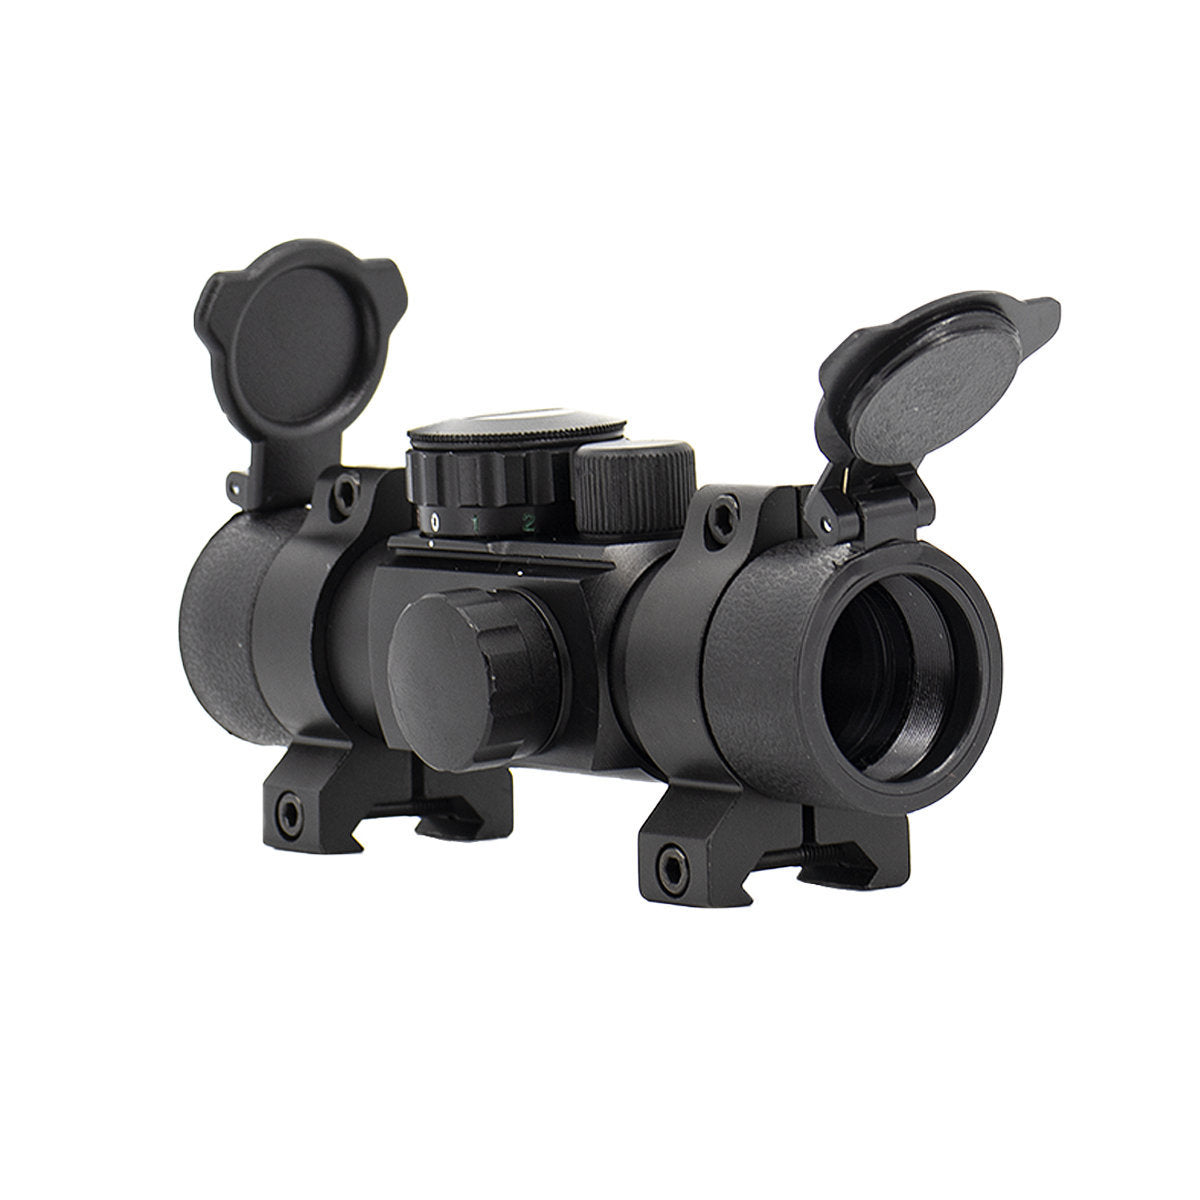 Low Powered Variable Optic or Red Dot Sight - Uncle Zo